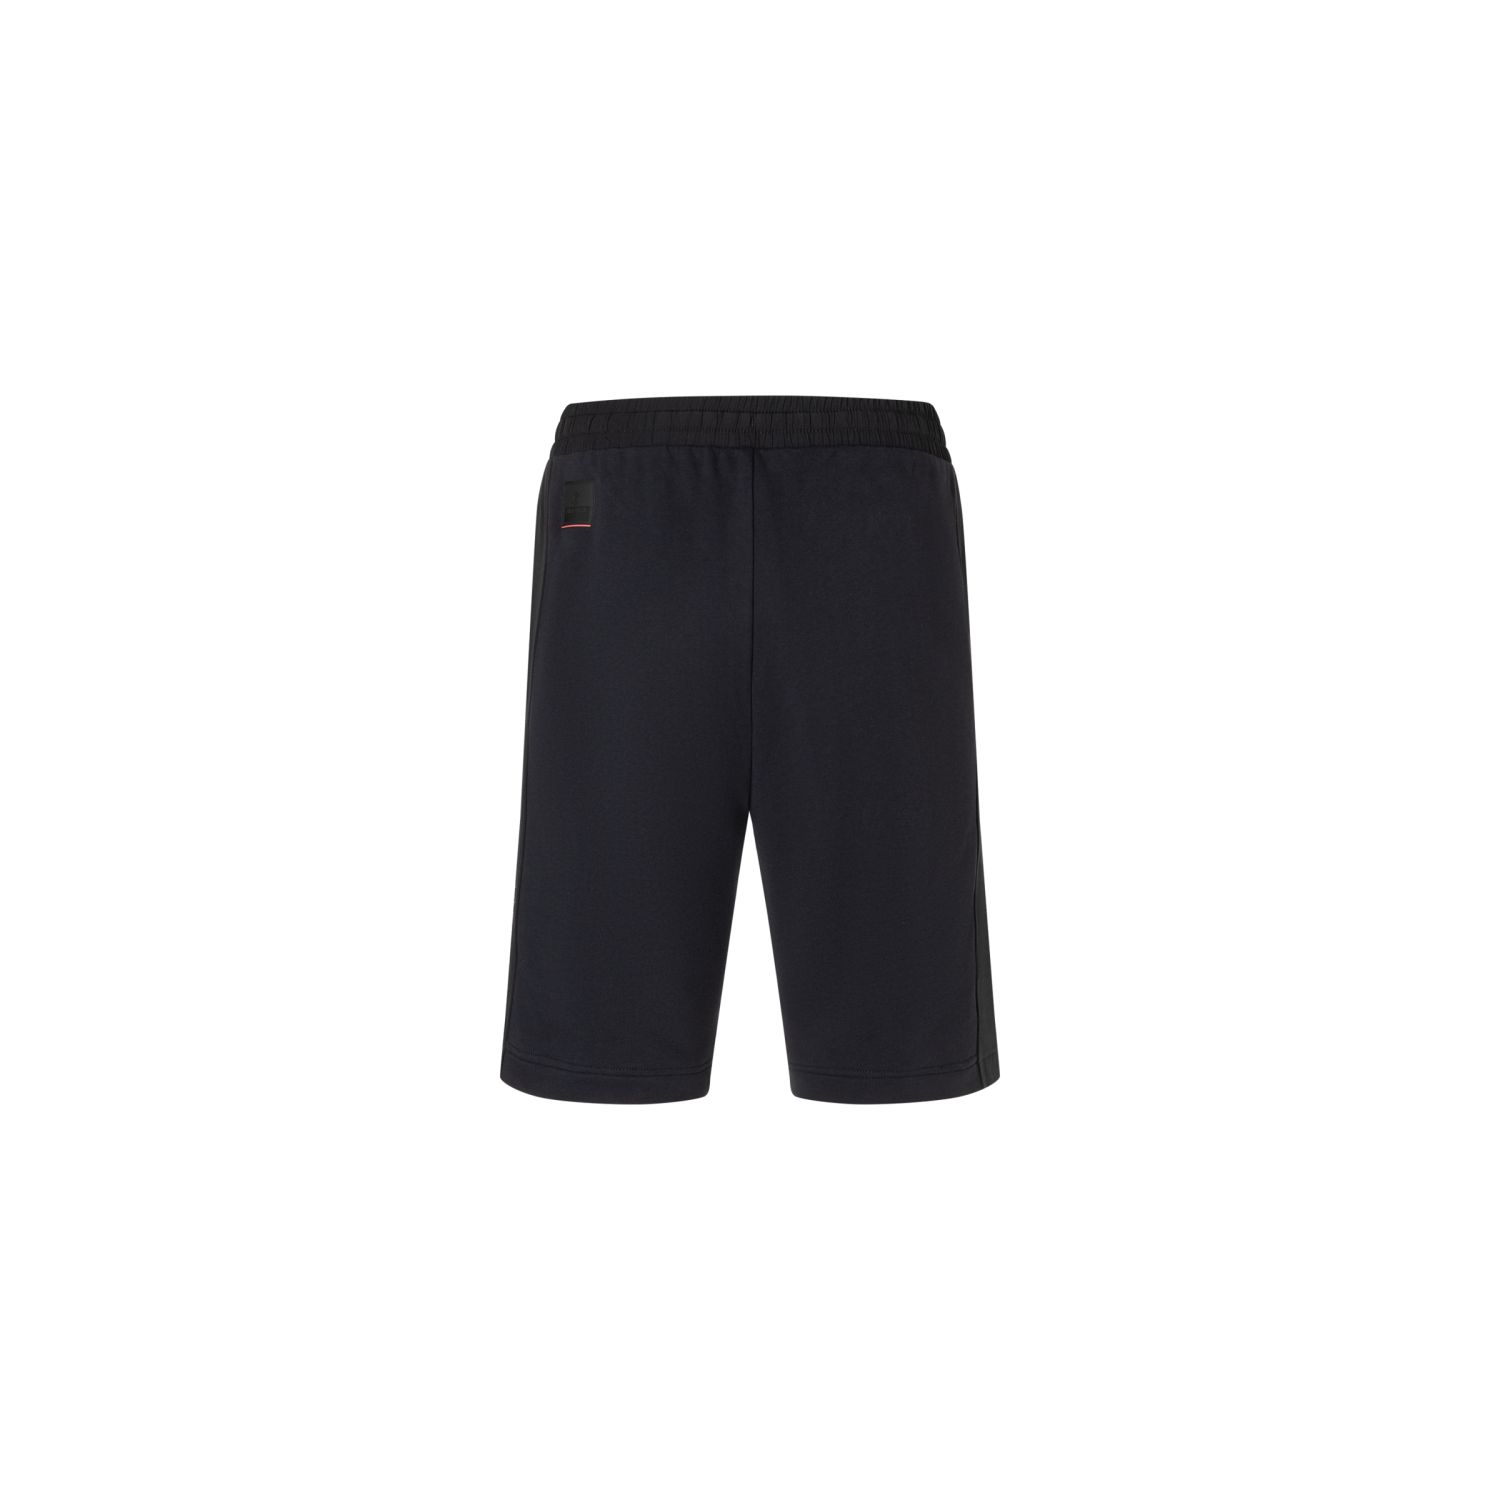 Shorts -  bogner fire and ice LYAS Sweat Shorts